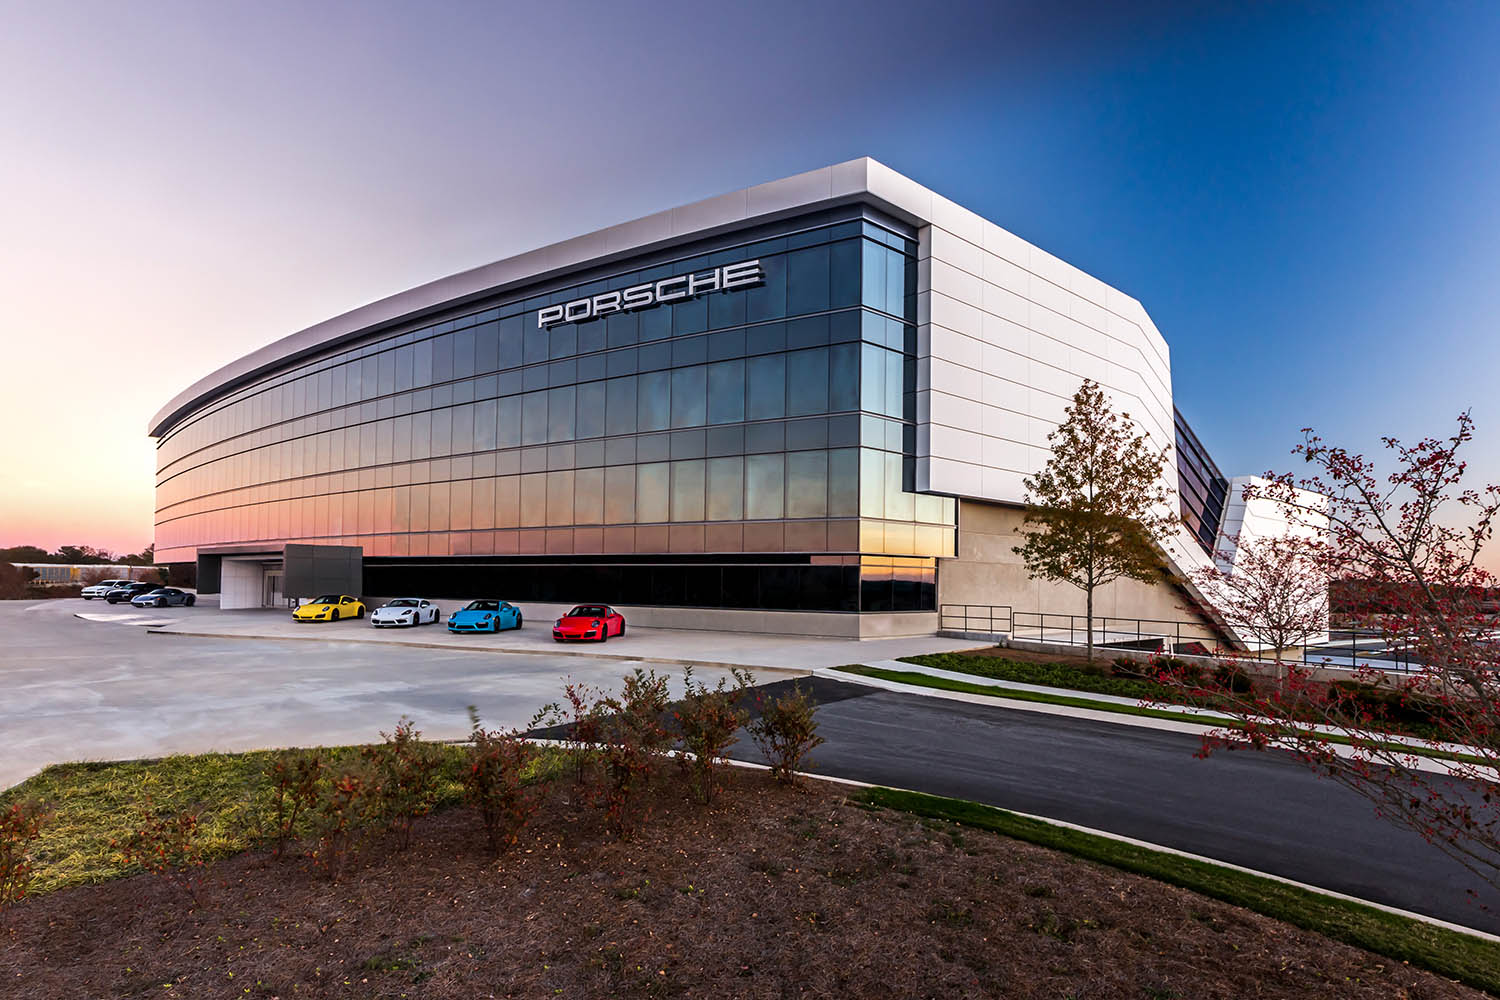 The front of Porsche's Experience Center in Atlanta, Georgia, with four Porsche sports cars parked outside, one each in yellow, silver, blue, and red